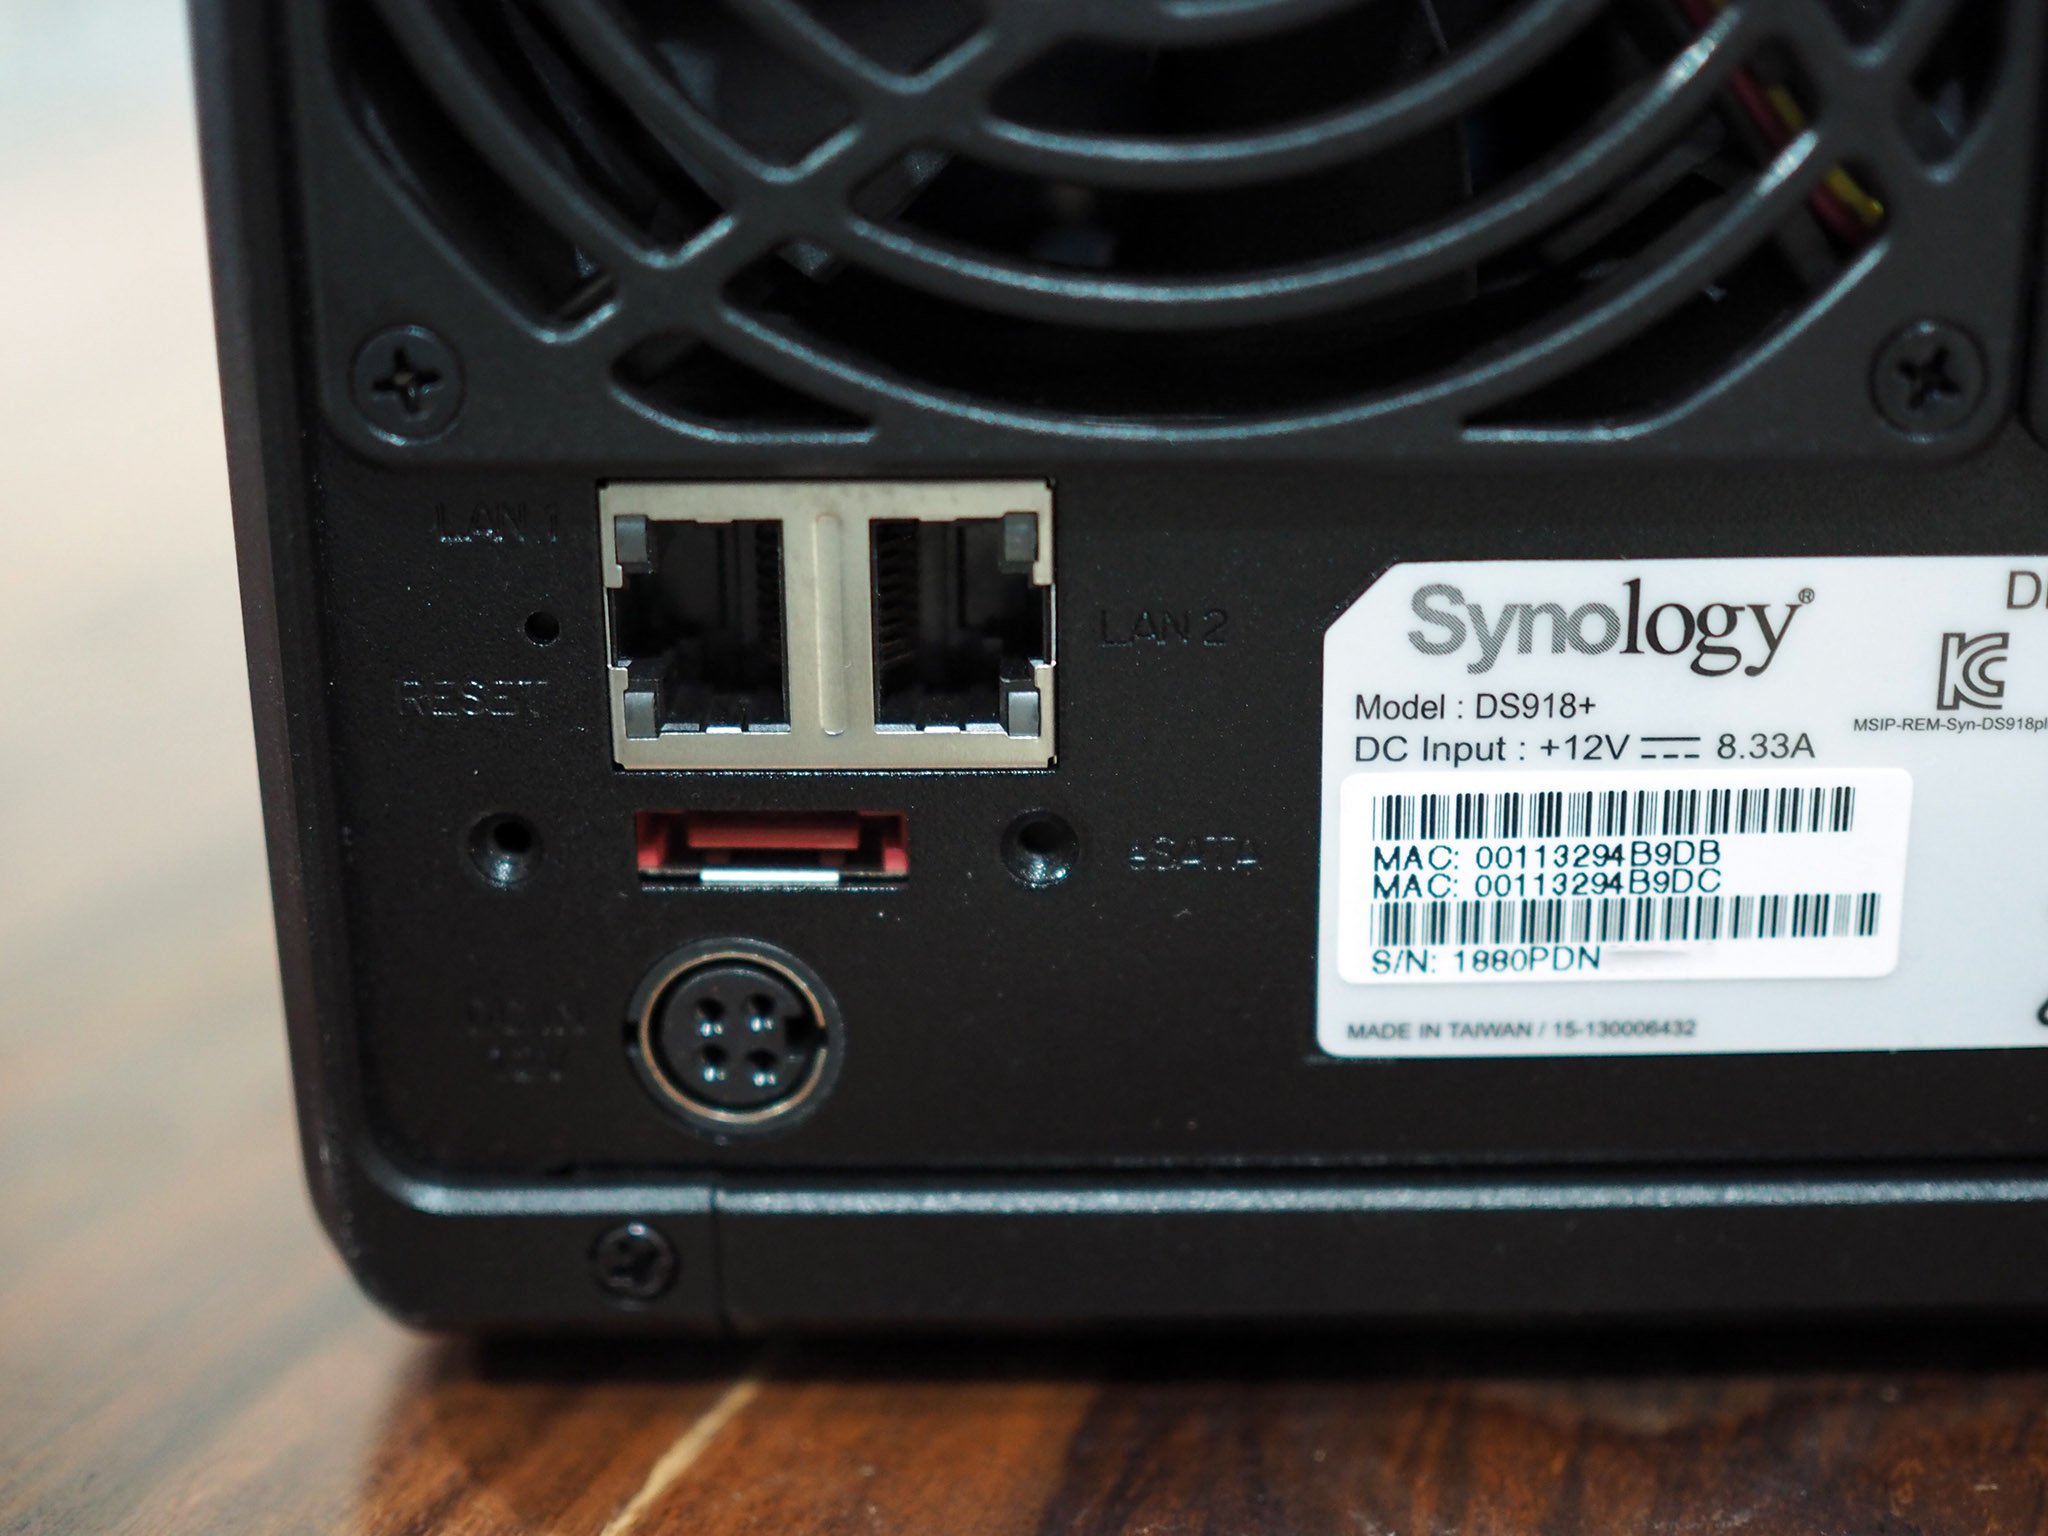 Synology DiskStation DS918+ Review: Perfect NAS for home or small